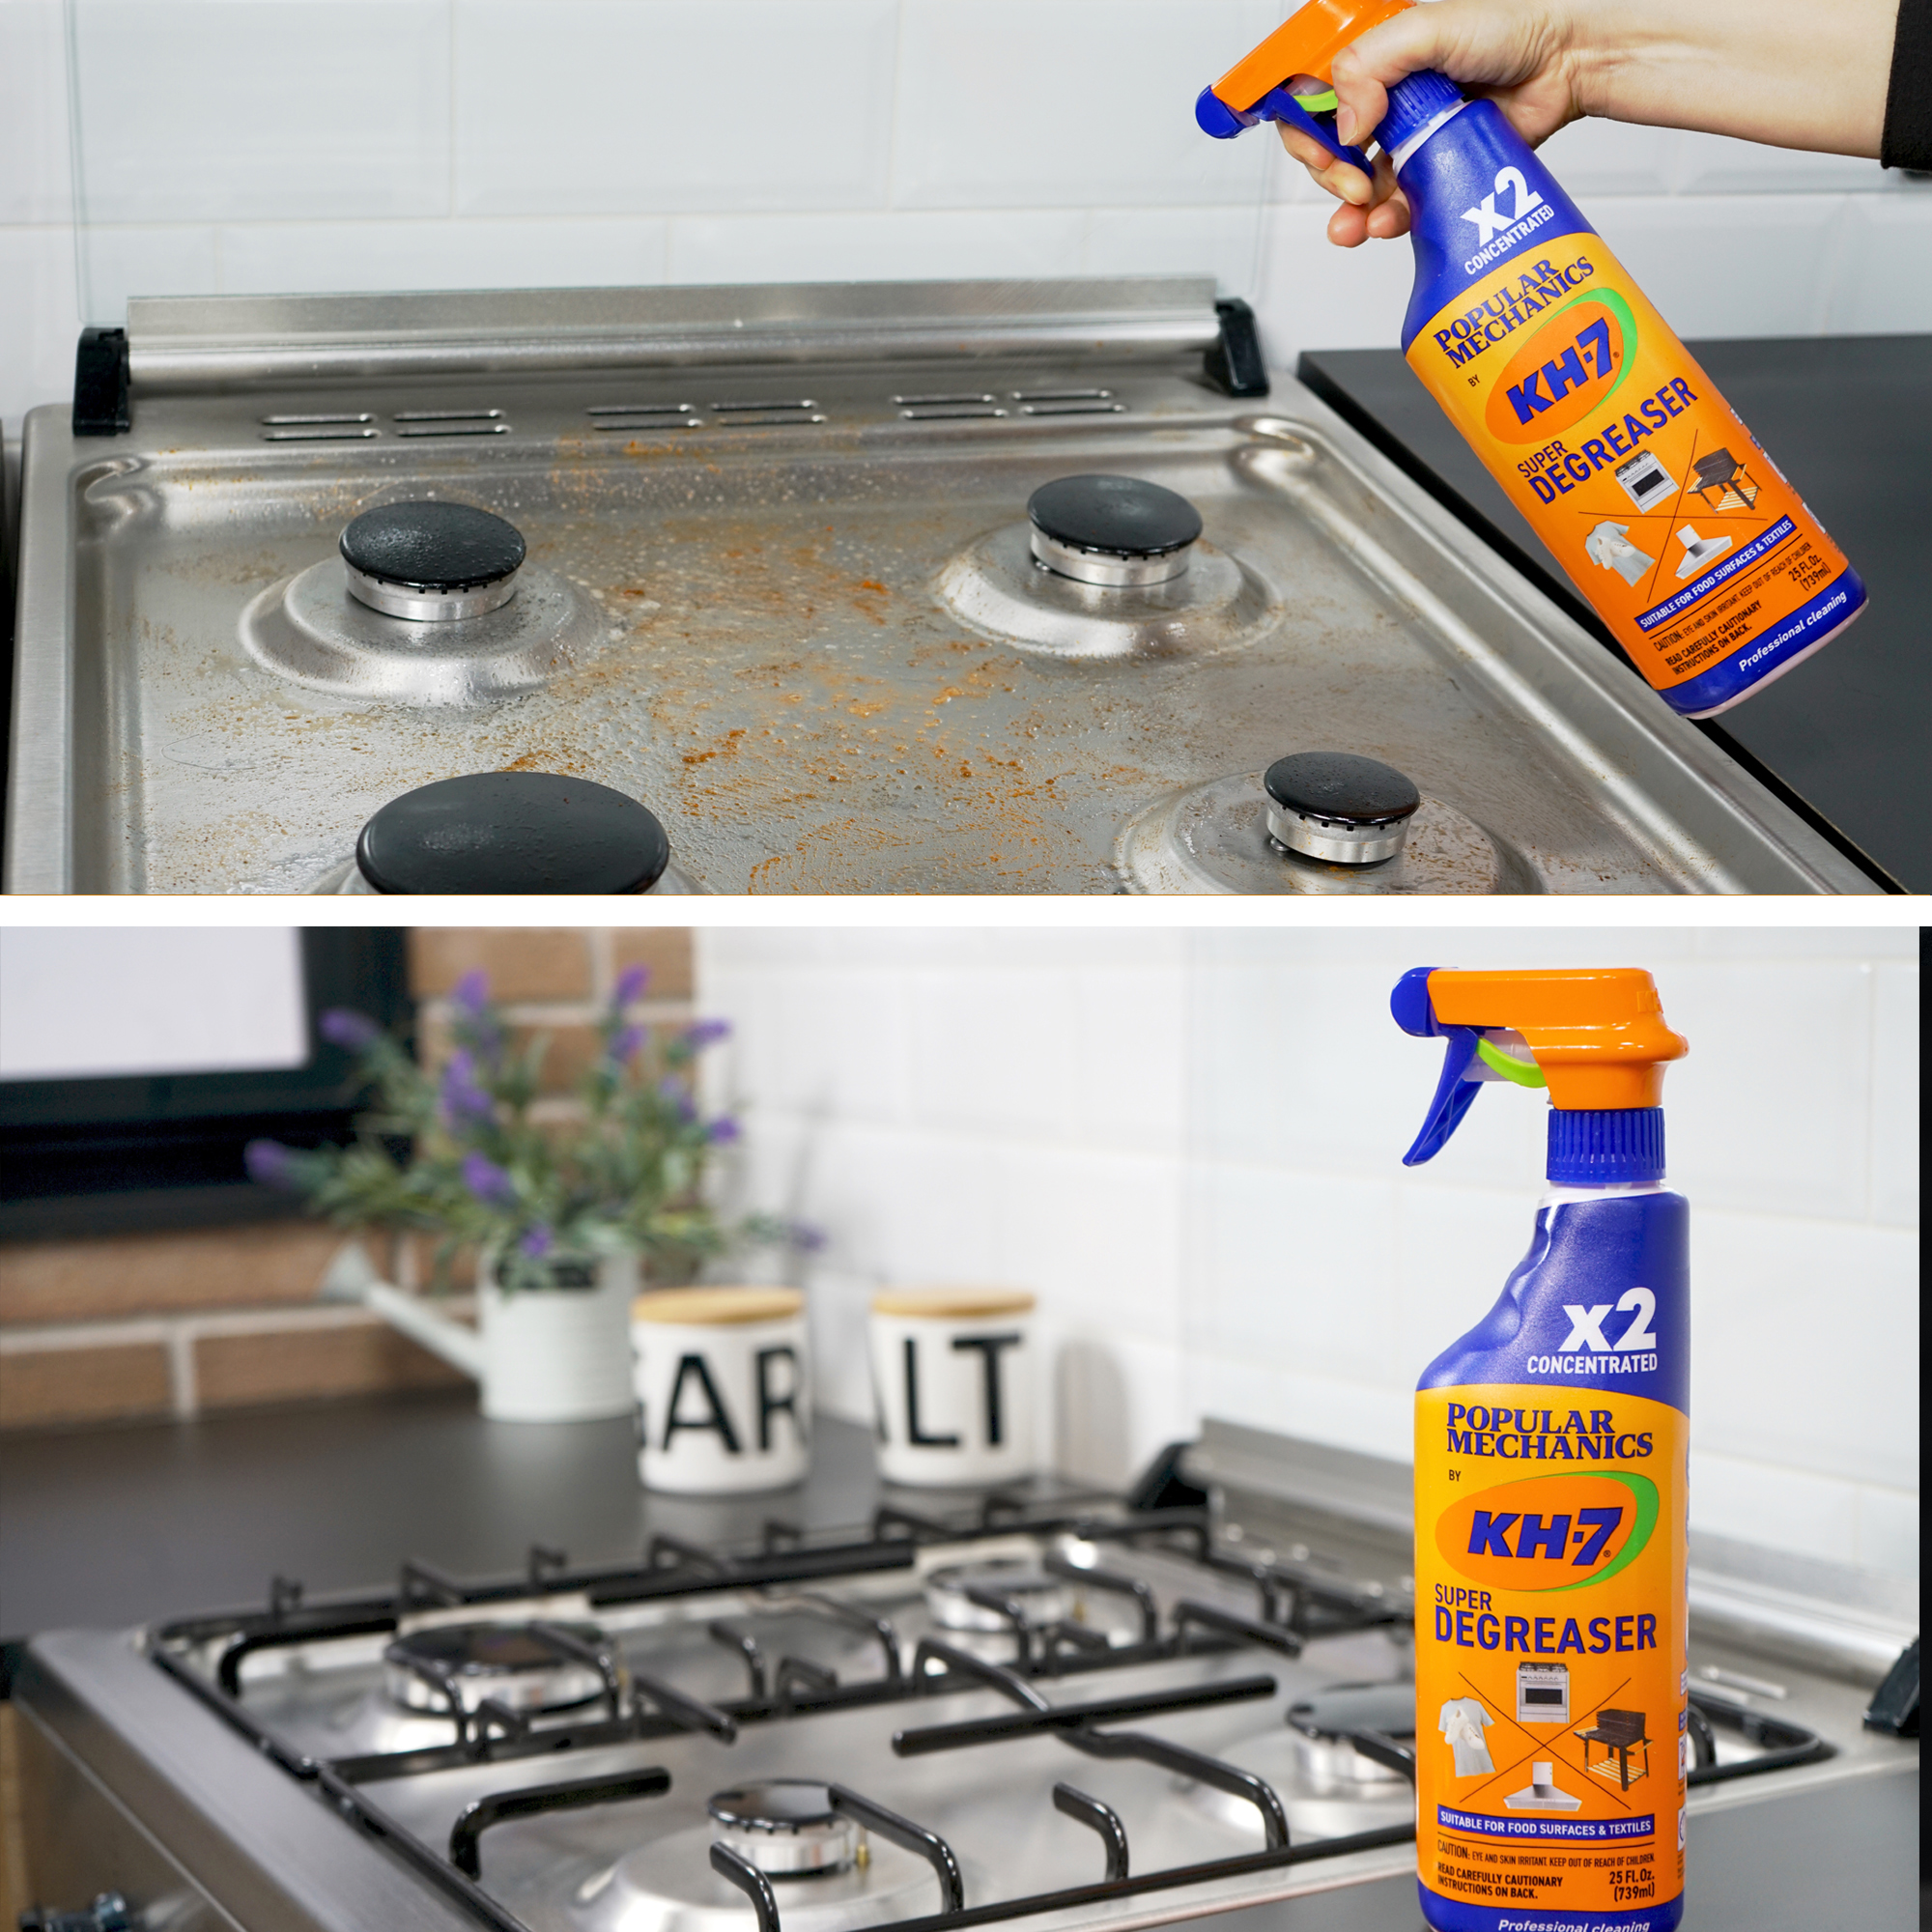 KH-7 Professional-Grade Concentrated Degreaser, All-Purpose Cleaner for Oven, Stove, Grill, Food Surfaces, Vehicles, Clothing & More, 25 oz - image 4 of 9